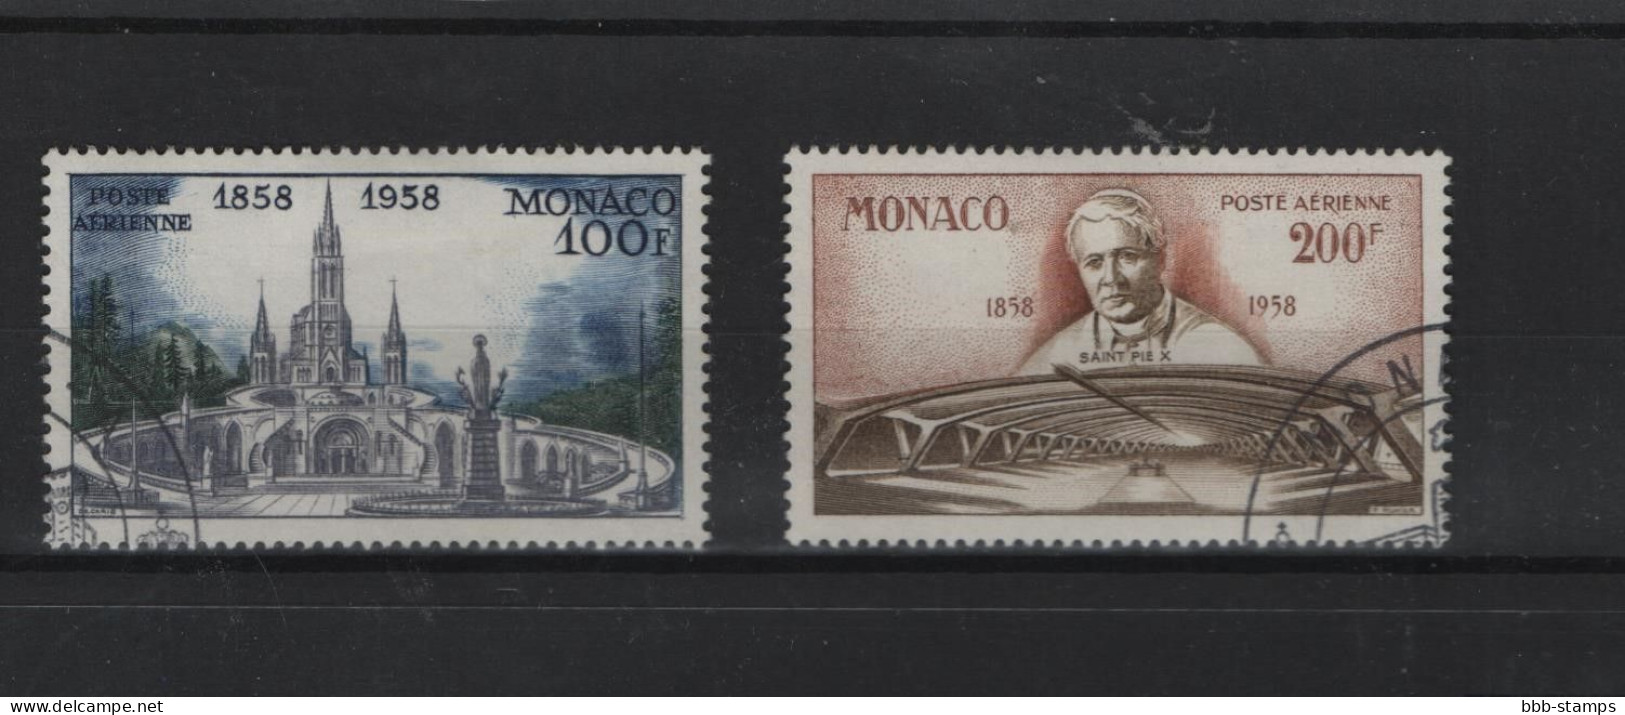 Monaco Michel Cat.No. Used 601/602 - Used Stamps